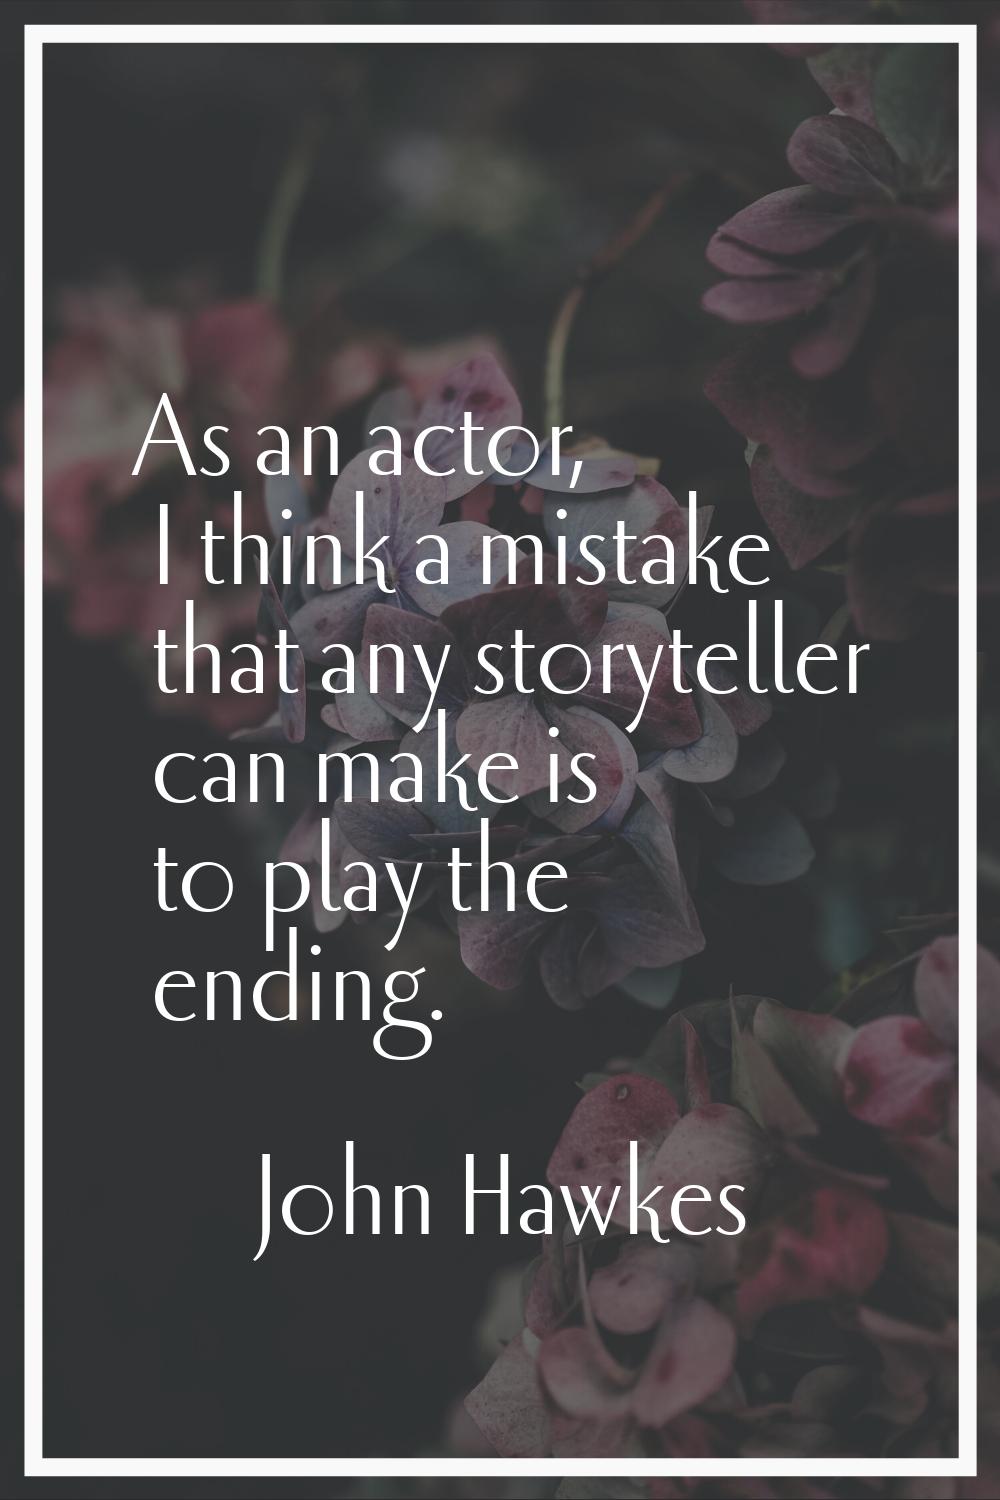 As an actor, I think a mistake that any storyteller can make is to play the ending.